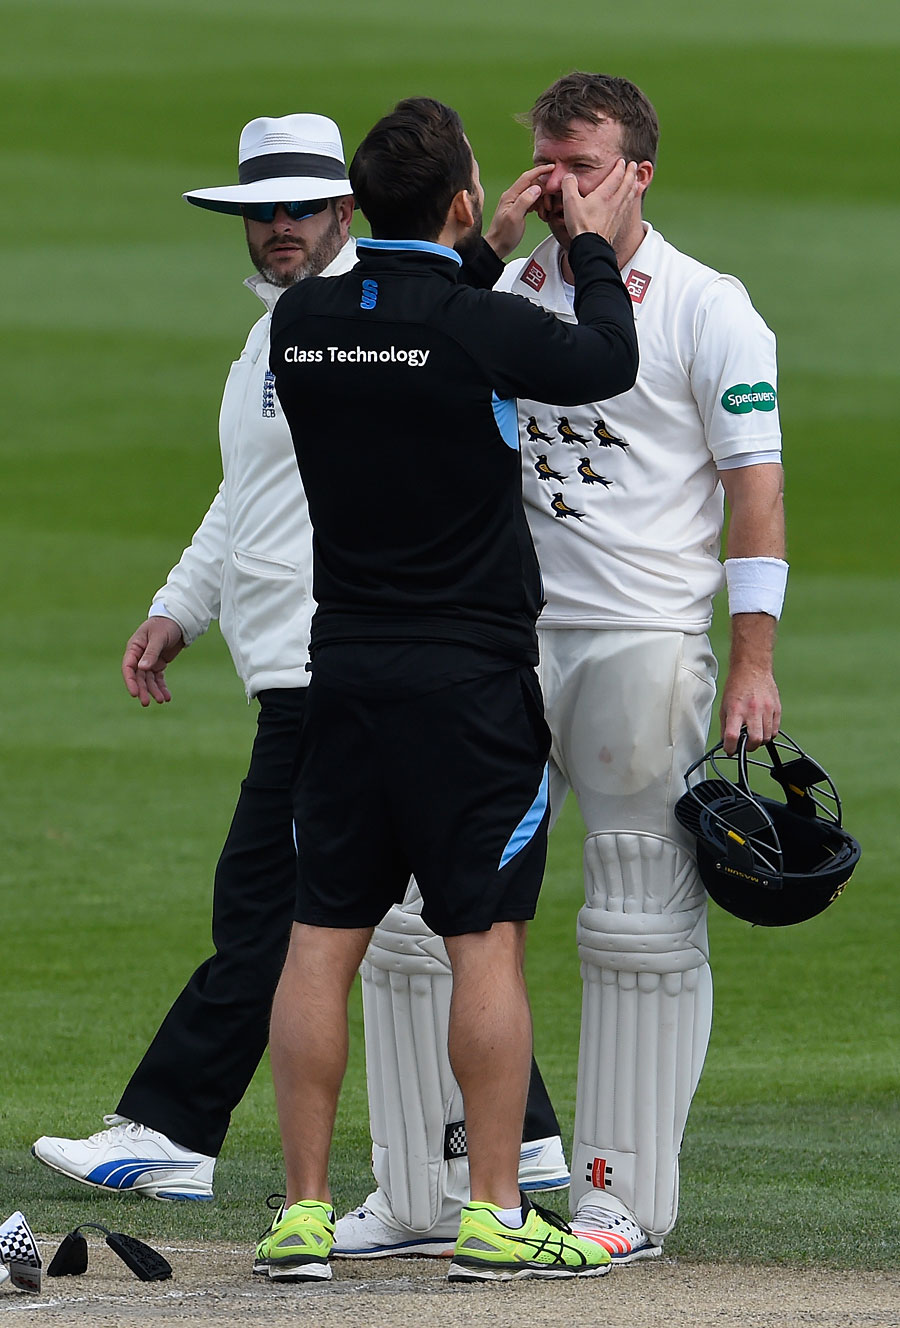 Chris Nash gets checked over by the physio on third day of Division Two match between Sussex and Essex in County Championship at Hove on Tuesday.